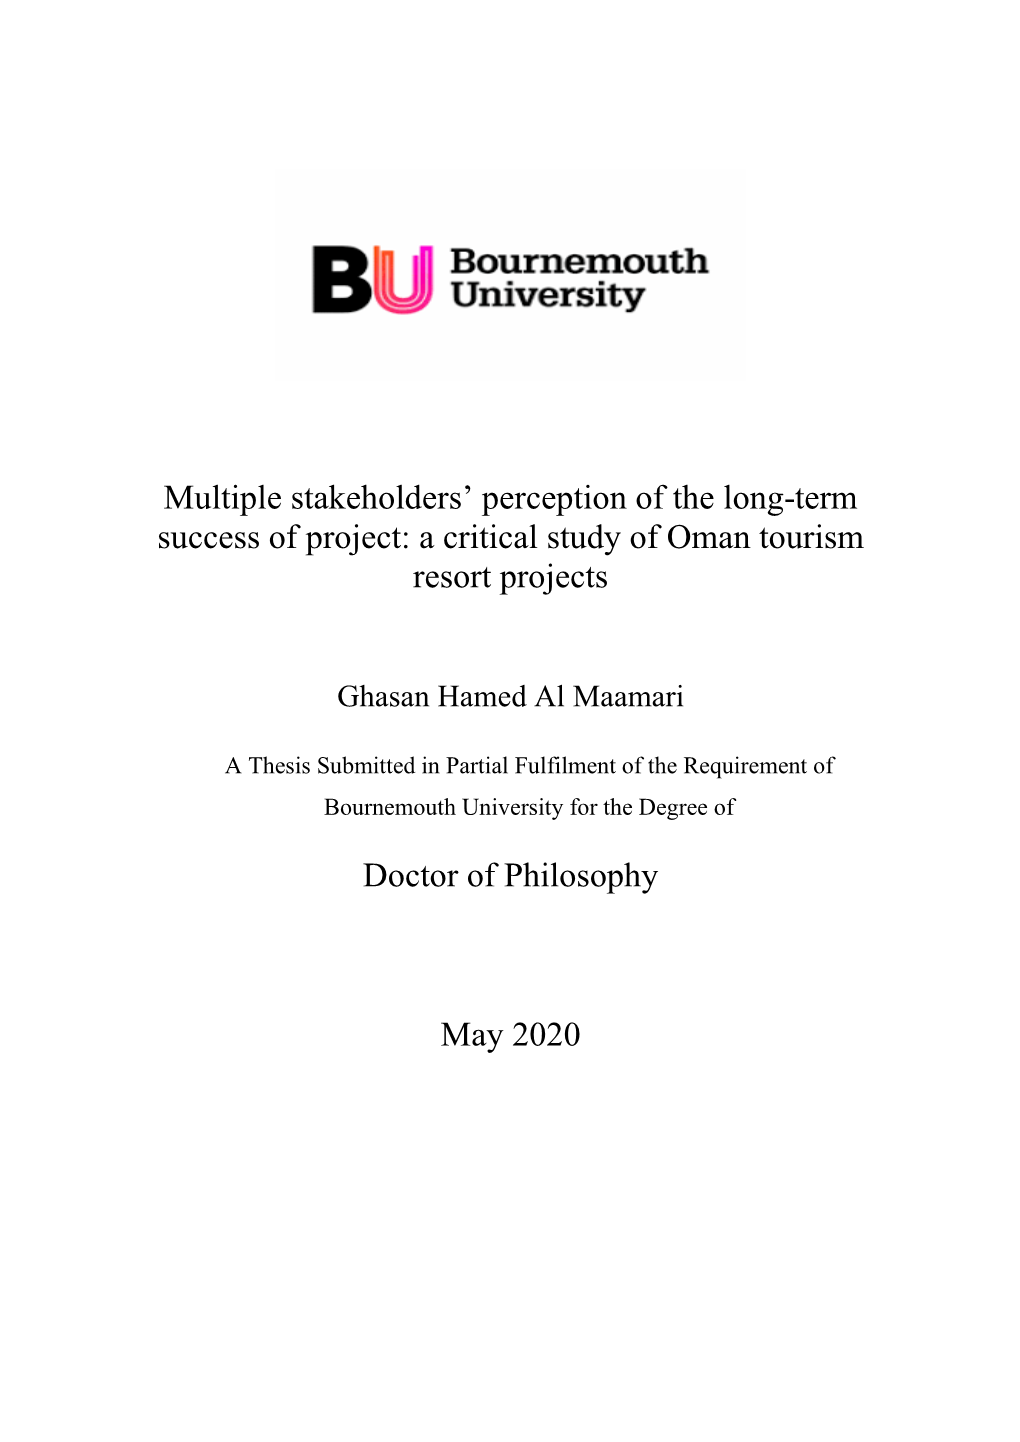 Multiple Stakeholders' Perception of the Long-Term Success of Project: a Critical Study of Oman Tourism Resort Projects